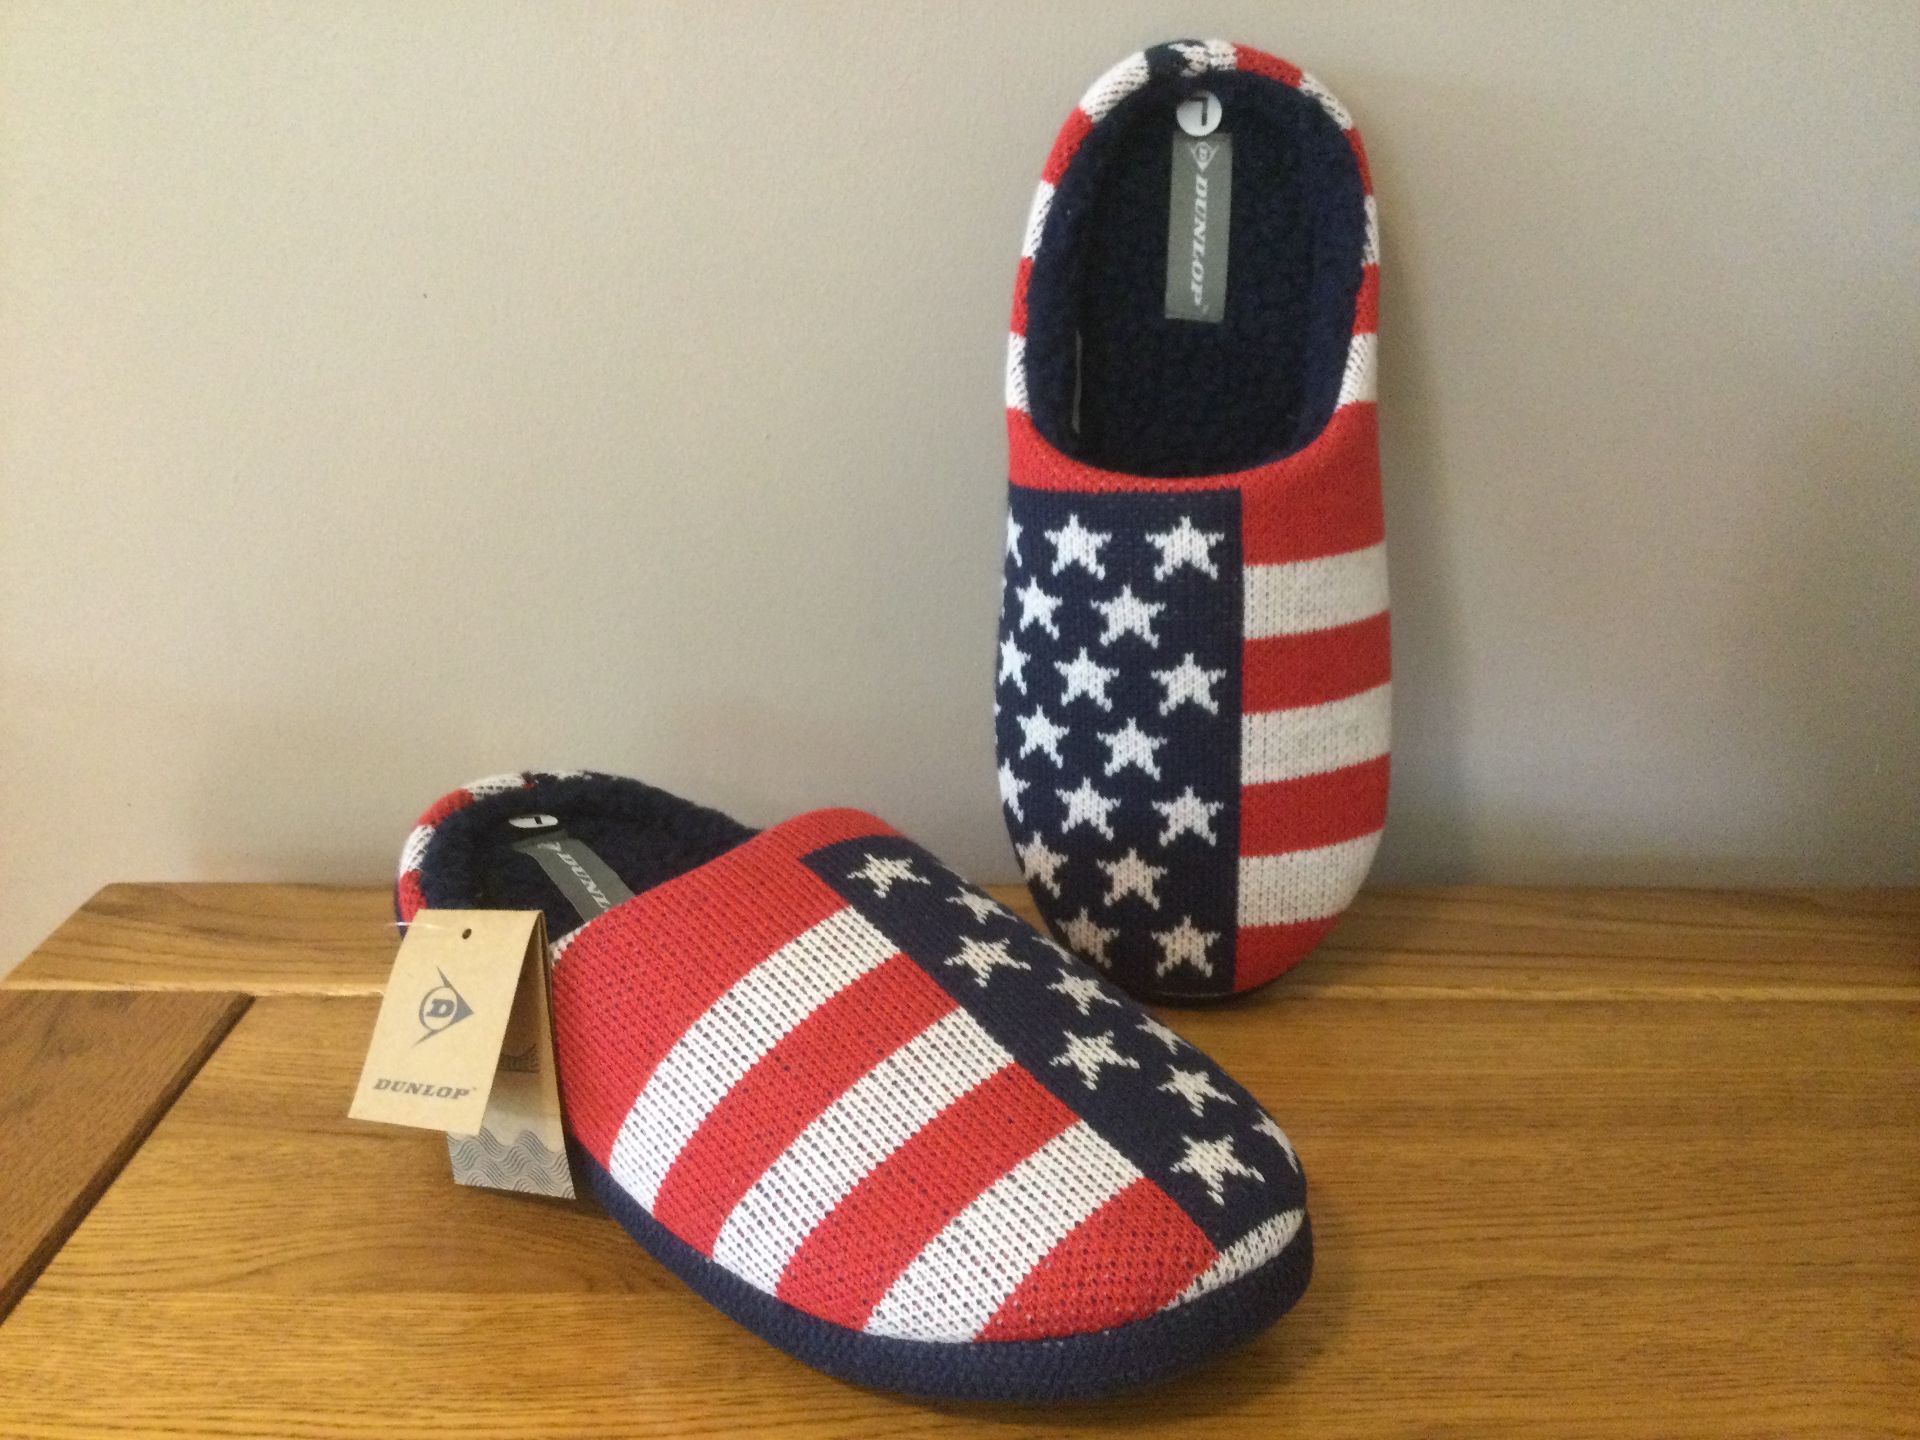 Job Lot 10 x Pairs Men's Dunlop, “USA Stars and Stripes” Memory Foam, Mule Slippers, Size L (10/1... - Image 3 of 7